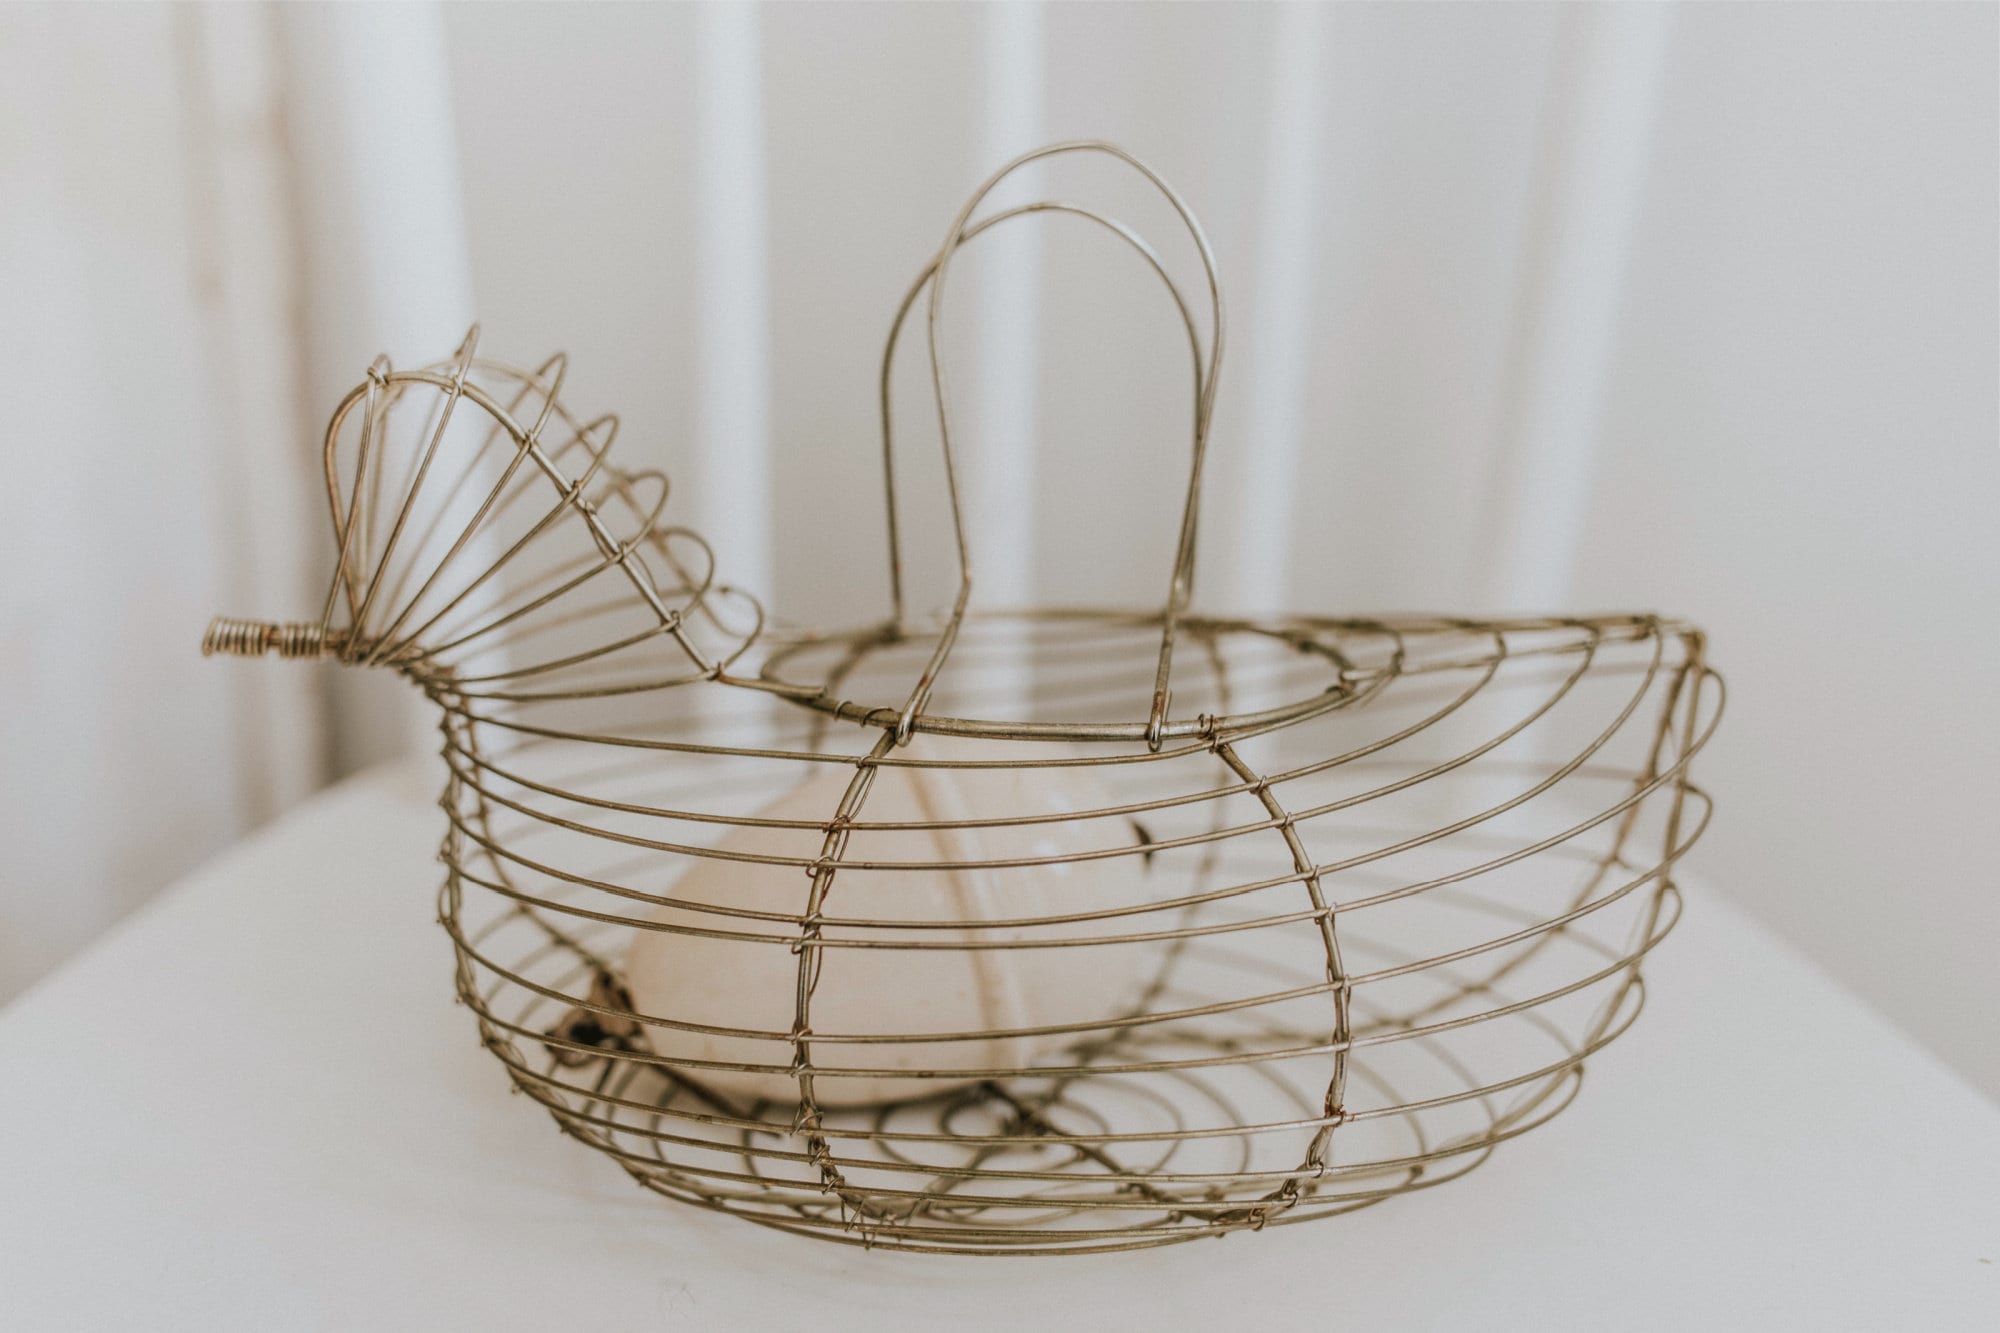 TAIANLE Farmhouse Metal Wire Egg Basket for Collecting Fresh Eggs,Round  Handle Egg Basket Vintage Style,Durable Collect & Gathering Basket for  Fresh